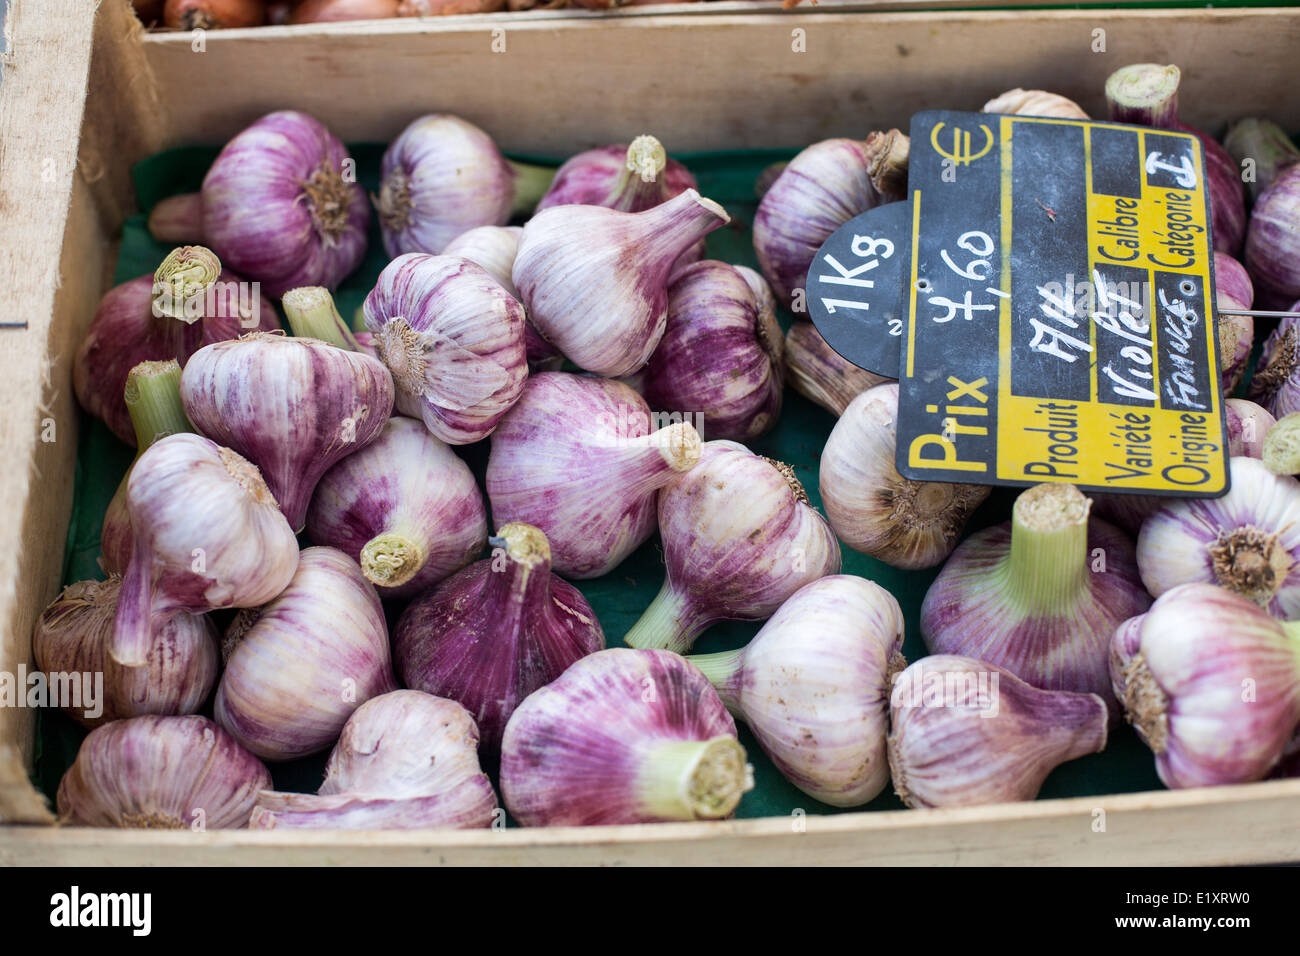 French garlic for sale in market in France Stock Photo